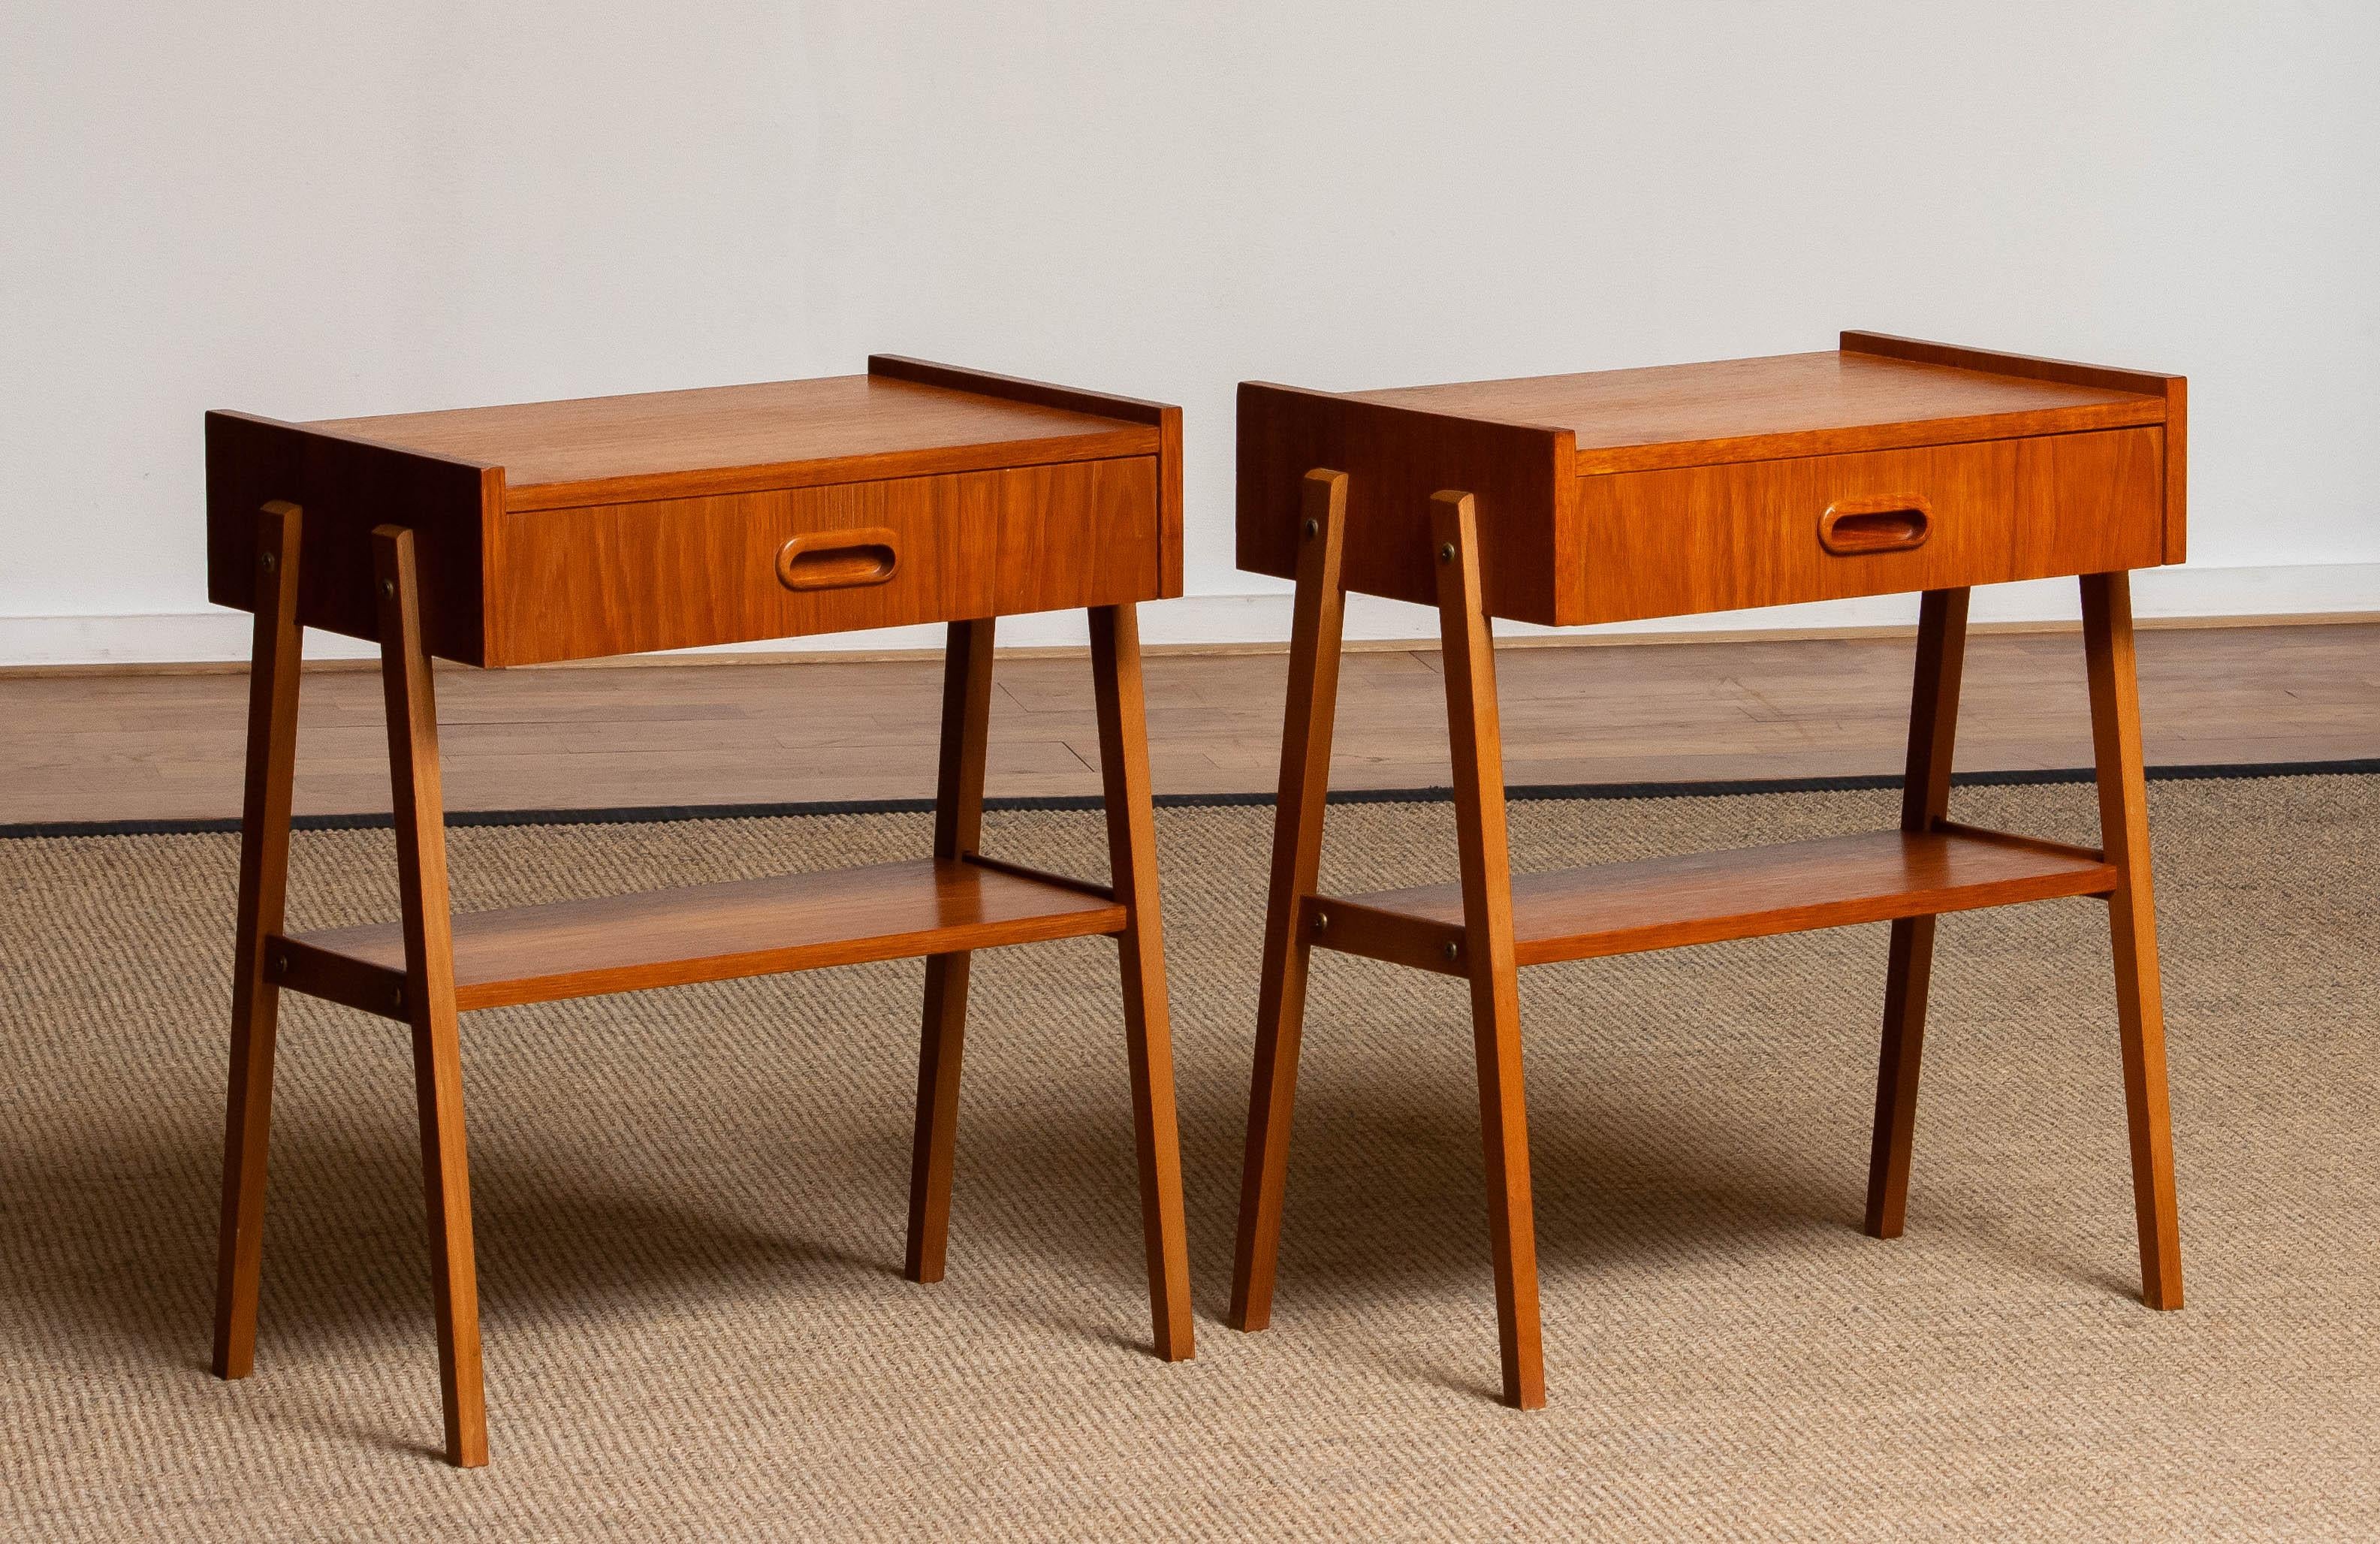 Beautiful set of two nightstands / bedside tables with drawer in teak from the 1950s and made by Ulferts Möbler Sweden. 
The overall condition for both nightstands is good.
Please note that we will replace the inside bottoms of the drawers for new